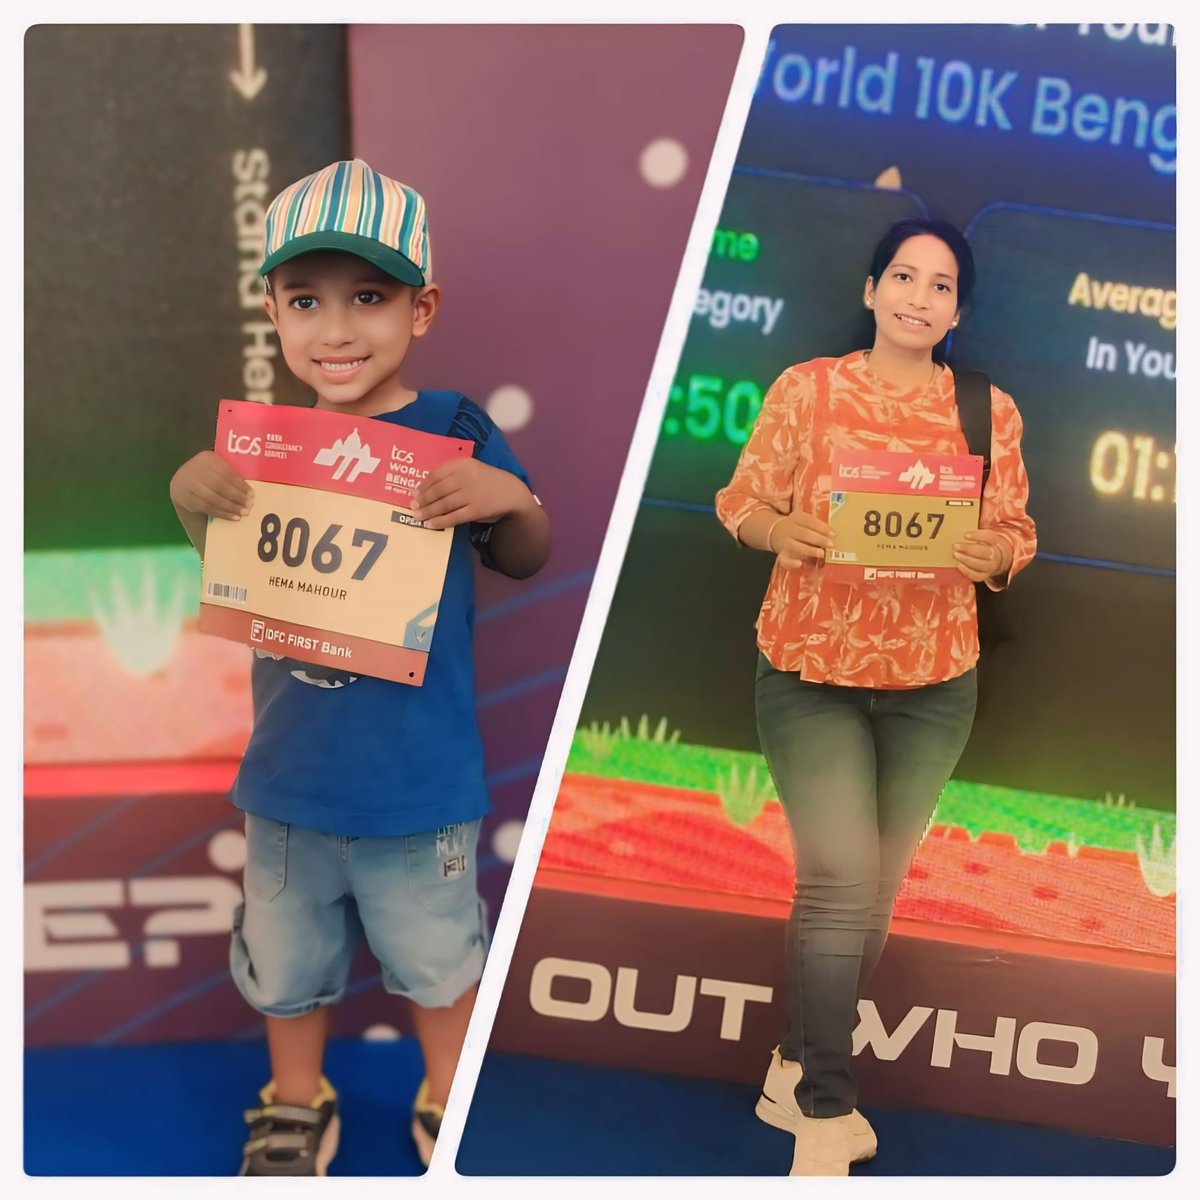 Hey there, Bangalore buddies! Who's pumped up for the #TCSWorld10K marathon? 🏃‍♂️🏃‍♀️ Exciting news – my son Harsh and I are gearing up to be your enthusiastic cheerleaders, hooting for Hema and all of you! 😊😍 Let's unite  there in Field Marshal Sam Manekshaw Parade Ground Bgl.